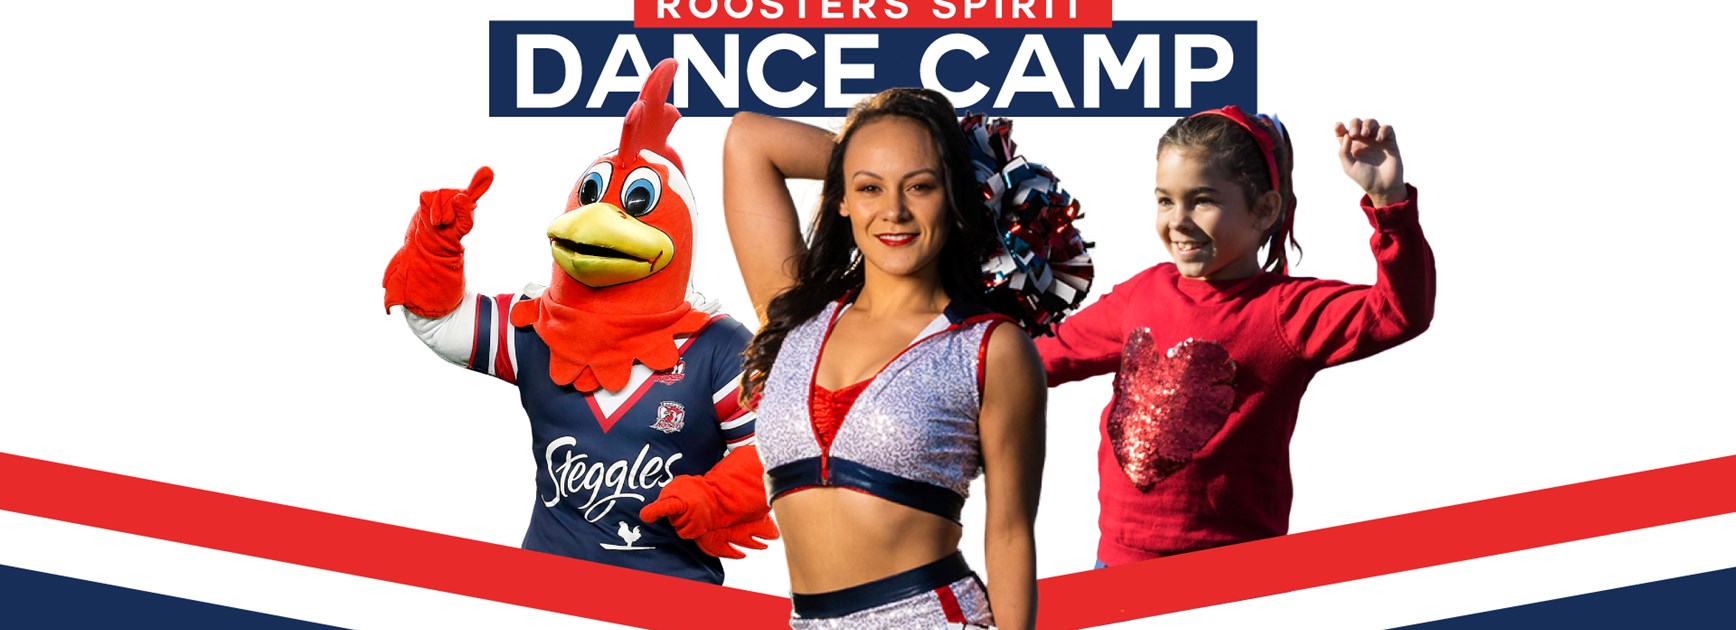 Sign up for the Roosters Spirit Dance Camp this July!